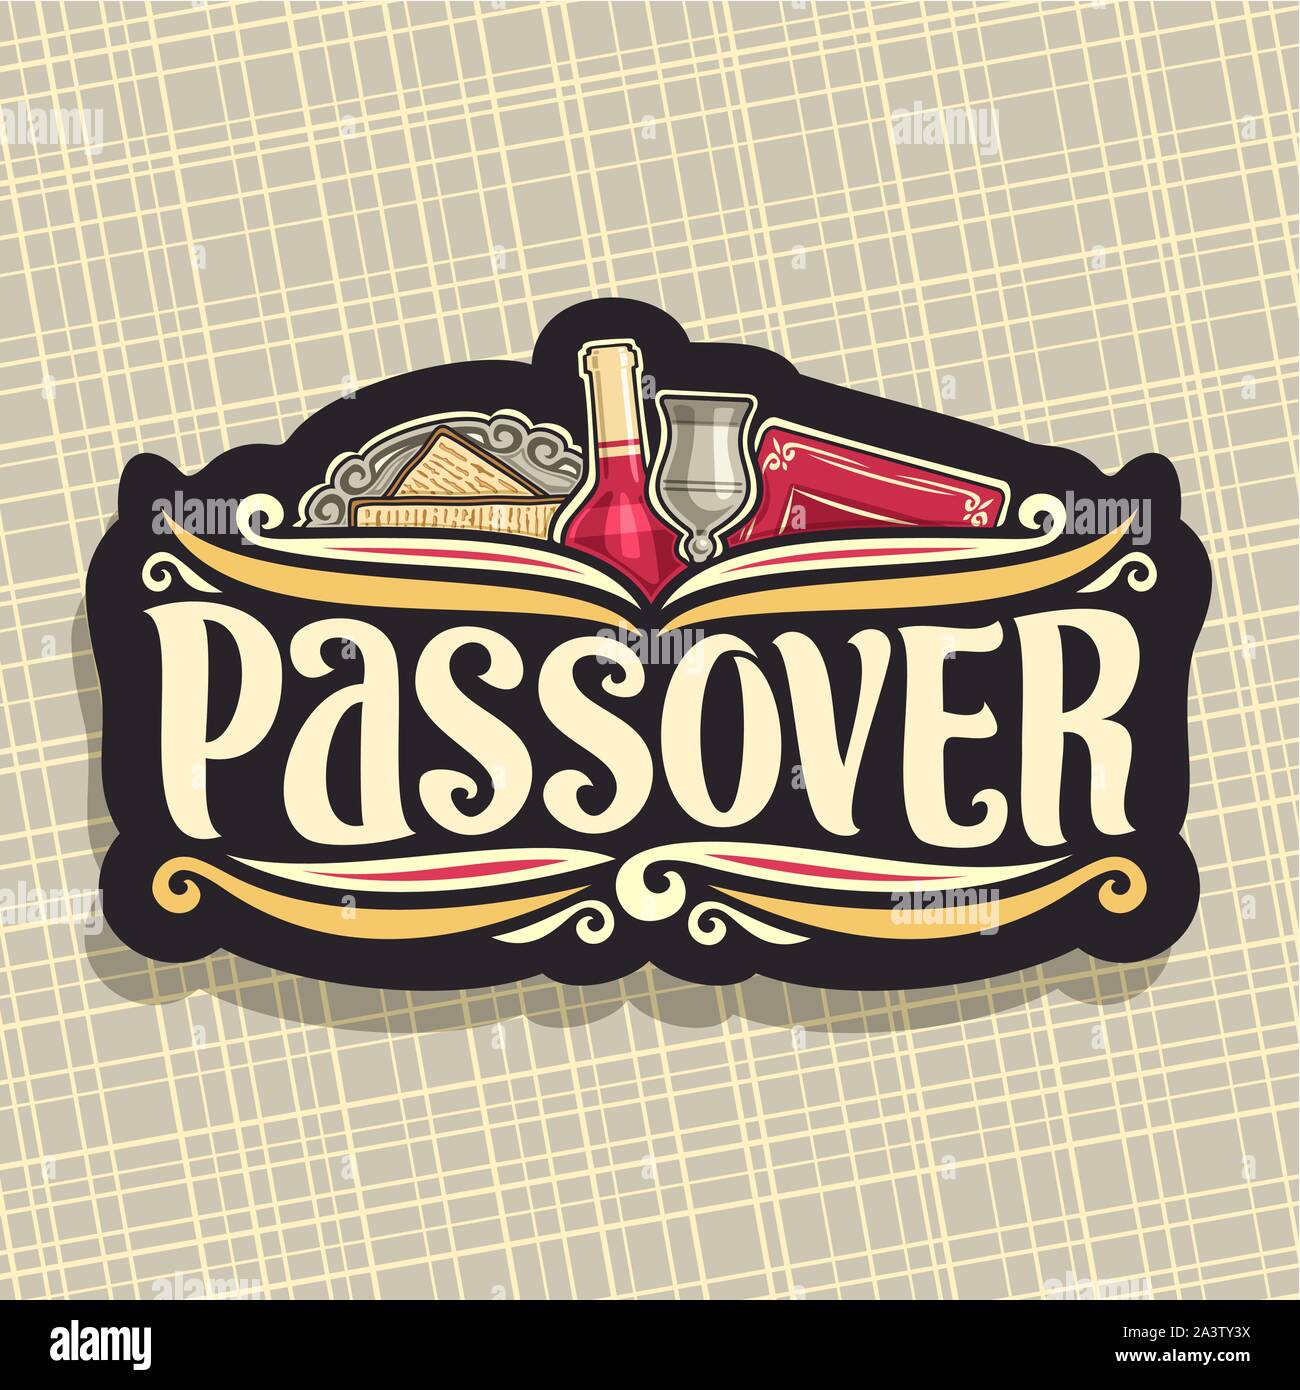 Vector logo for Passover holiday, original brush font for word passover, cut label with religious book torah, kosher flatbread matzah on antique plate Stock Vector